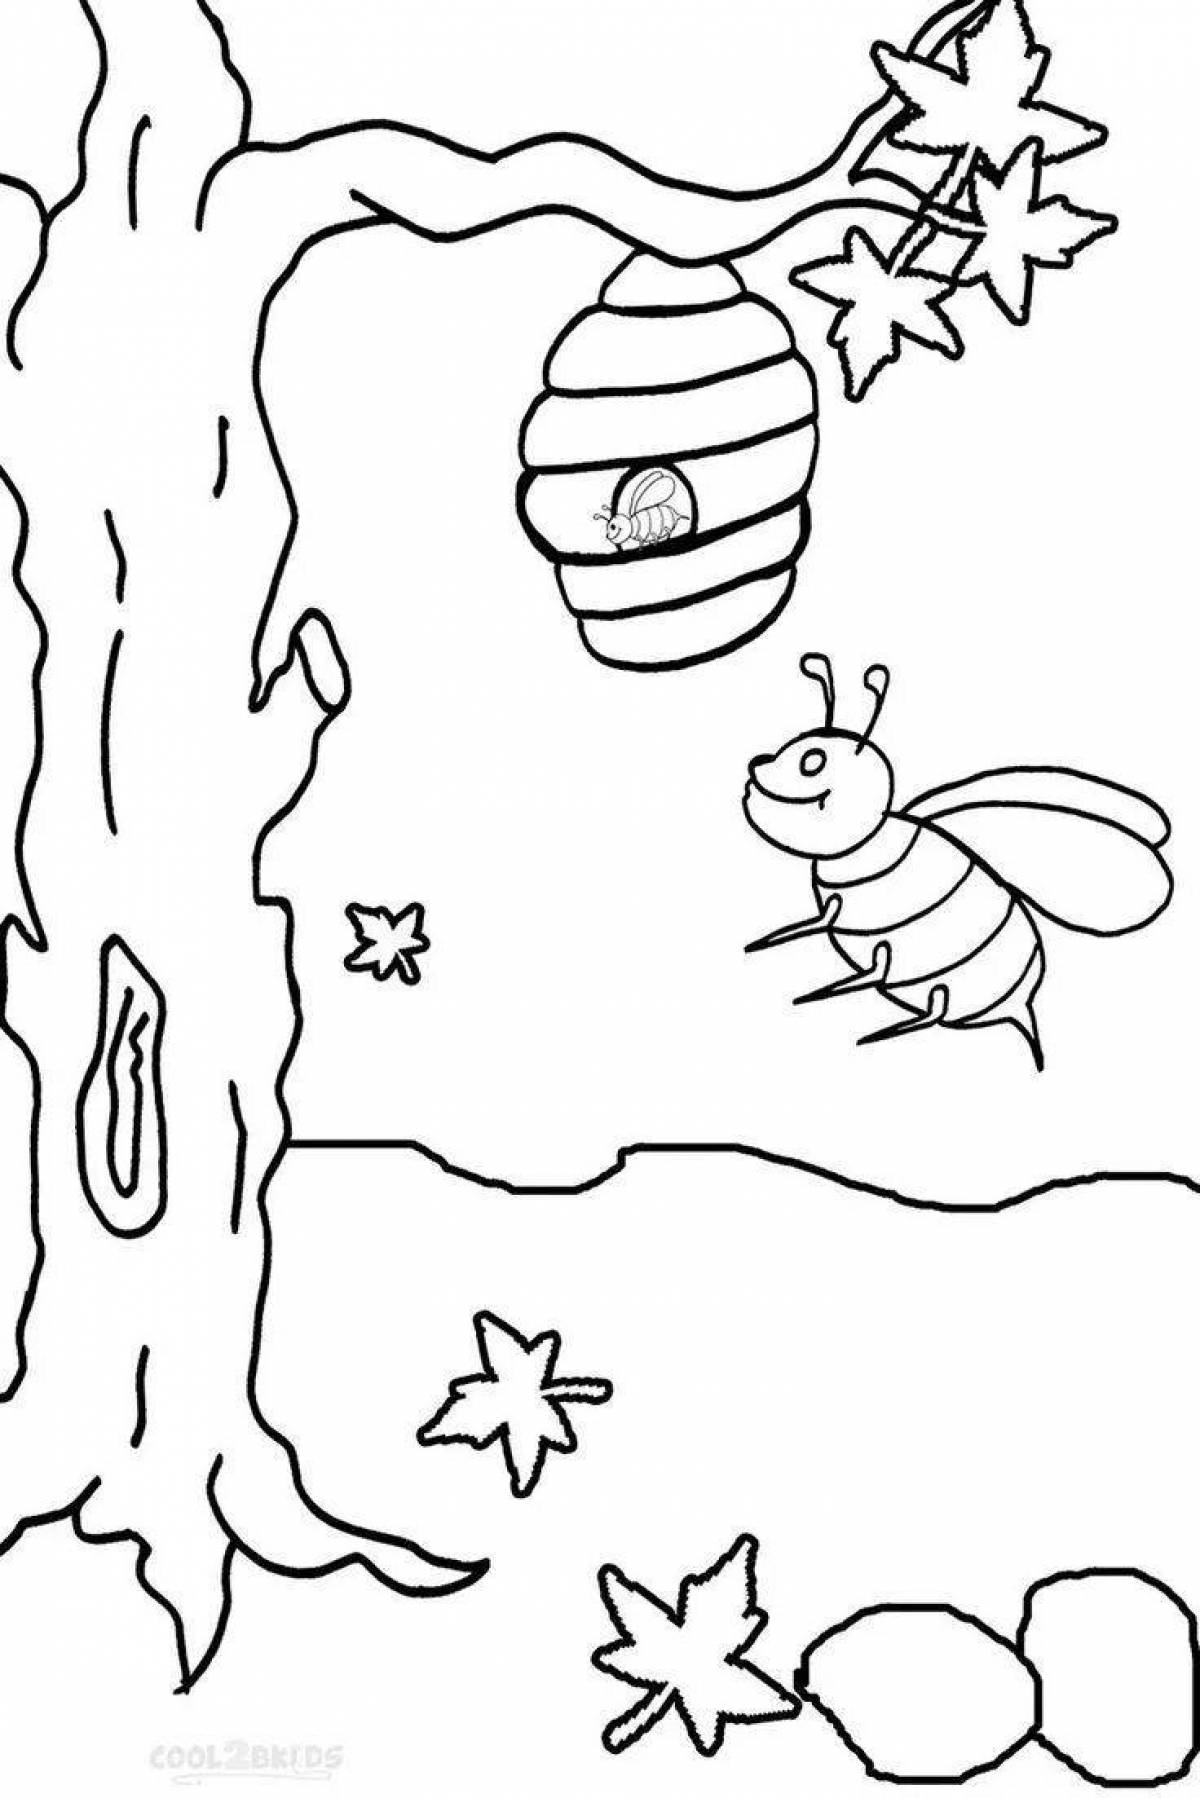 Amazing beehive coloring book for kids